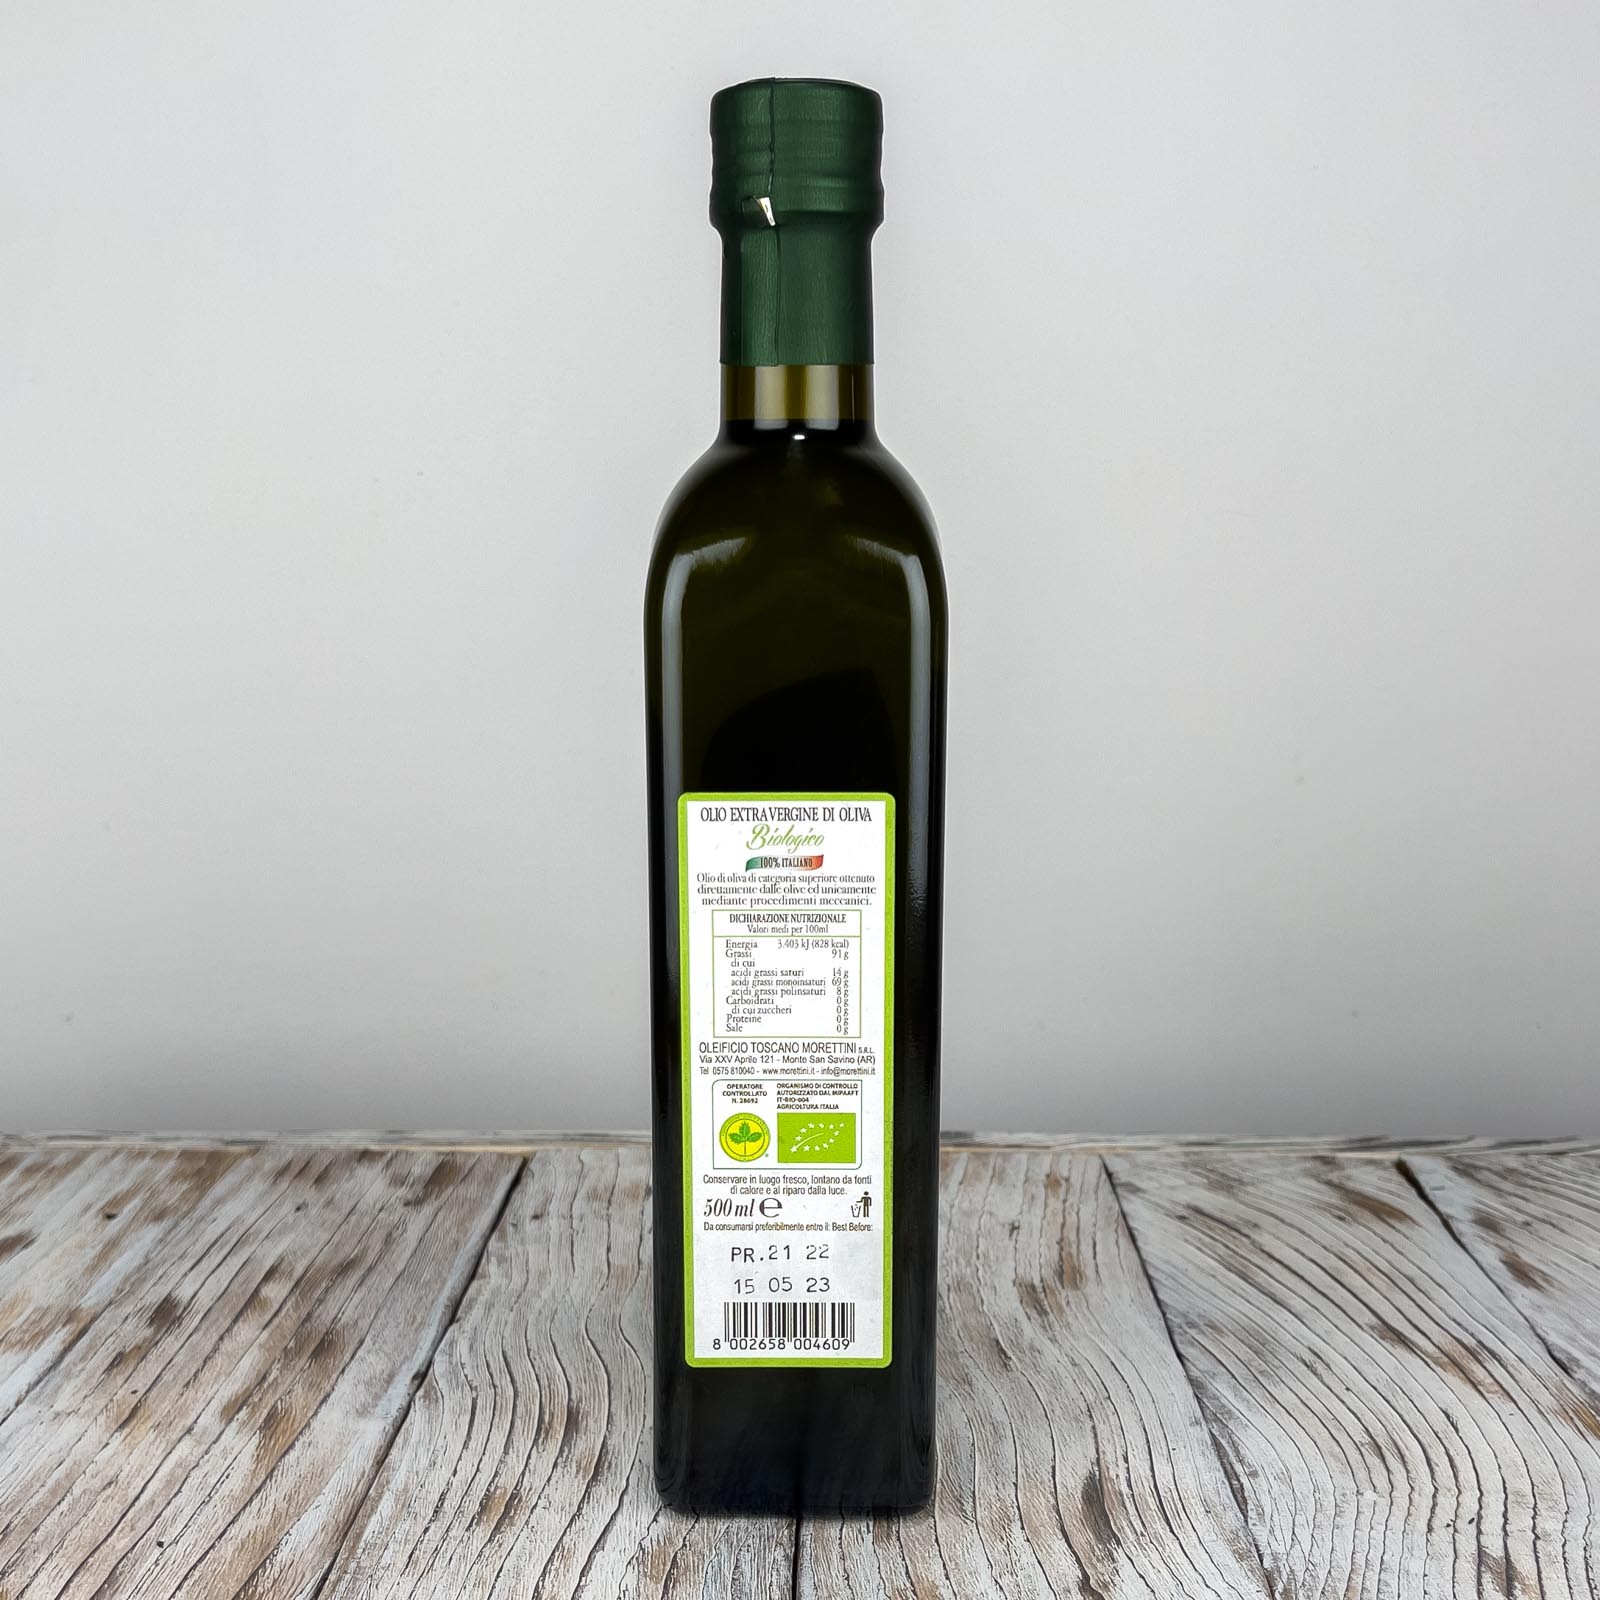 “Bioliva”, 100% Italian organic extra virgin olive oil of the highest quality, obtained directly from olives and solely by mechanical means - Production year 2021/2022.